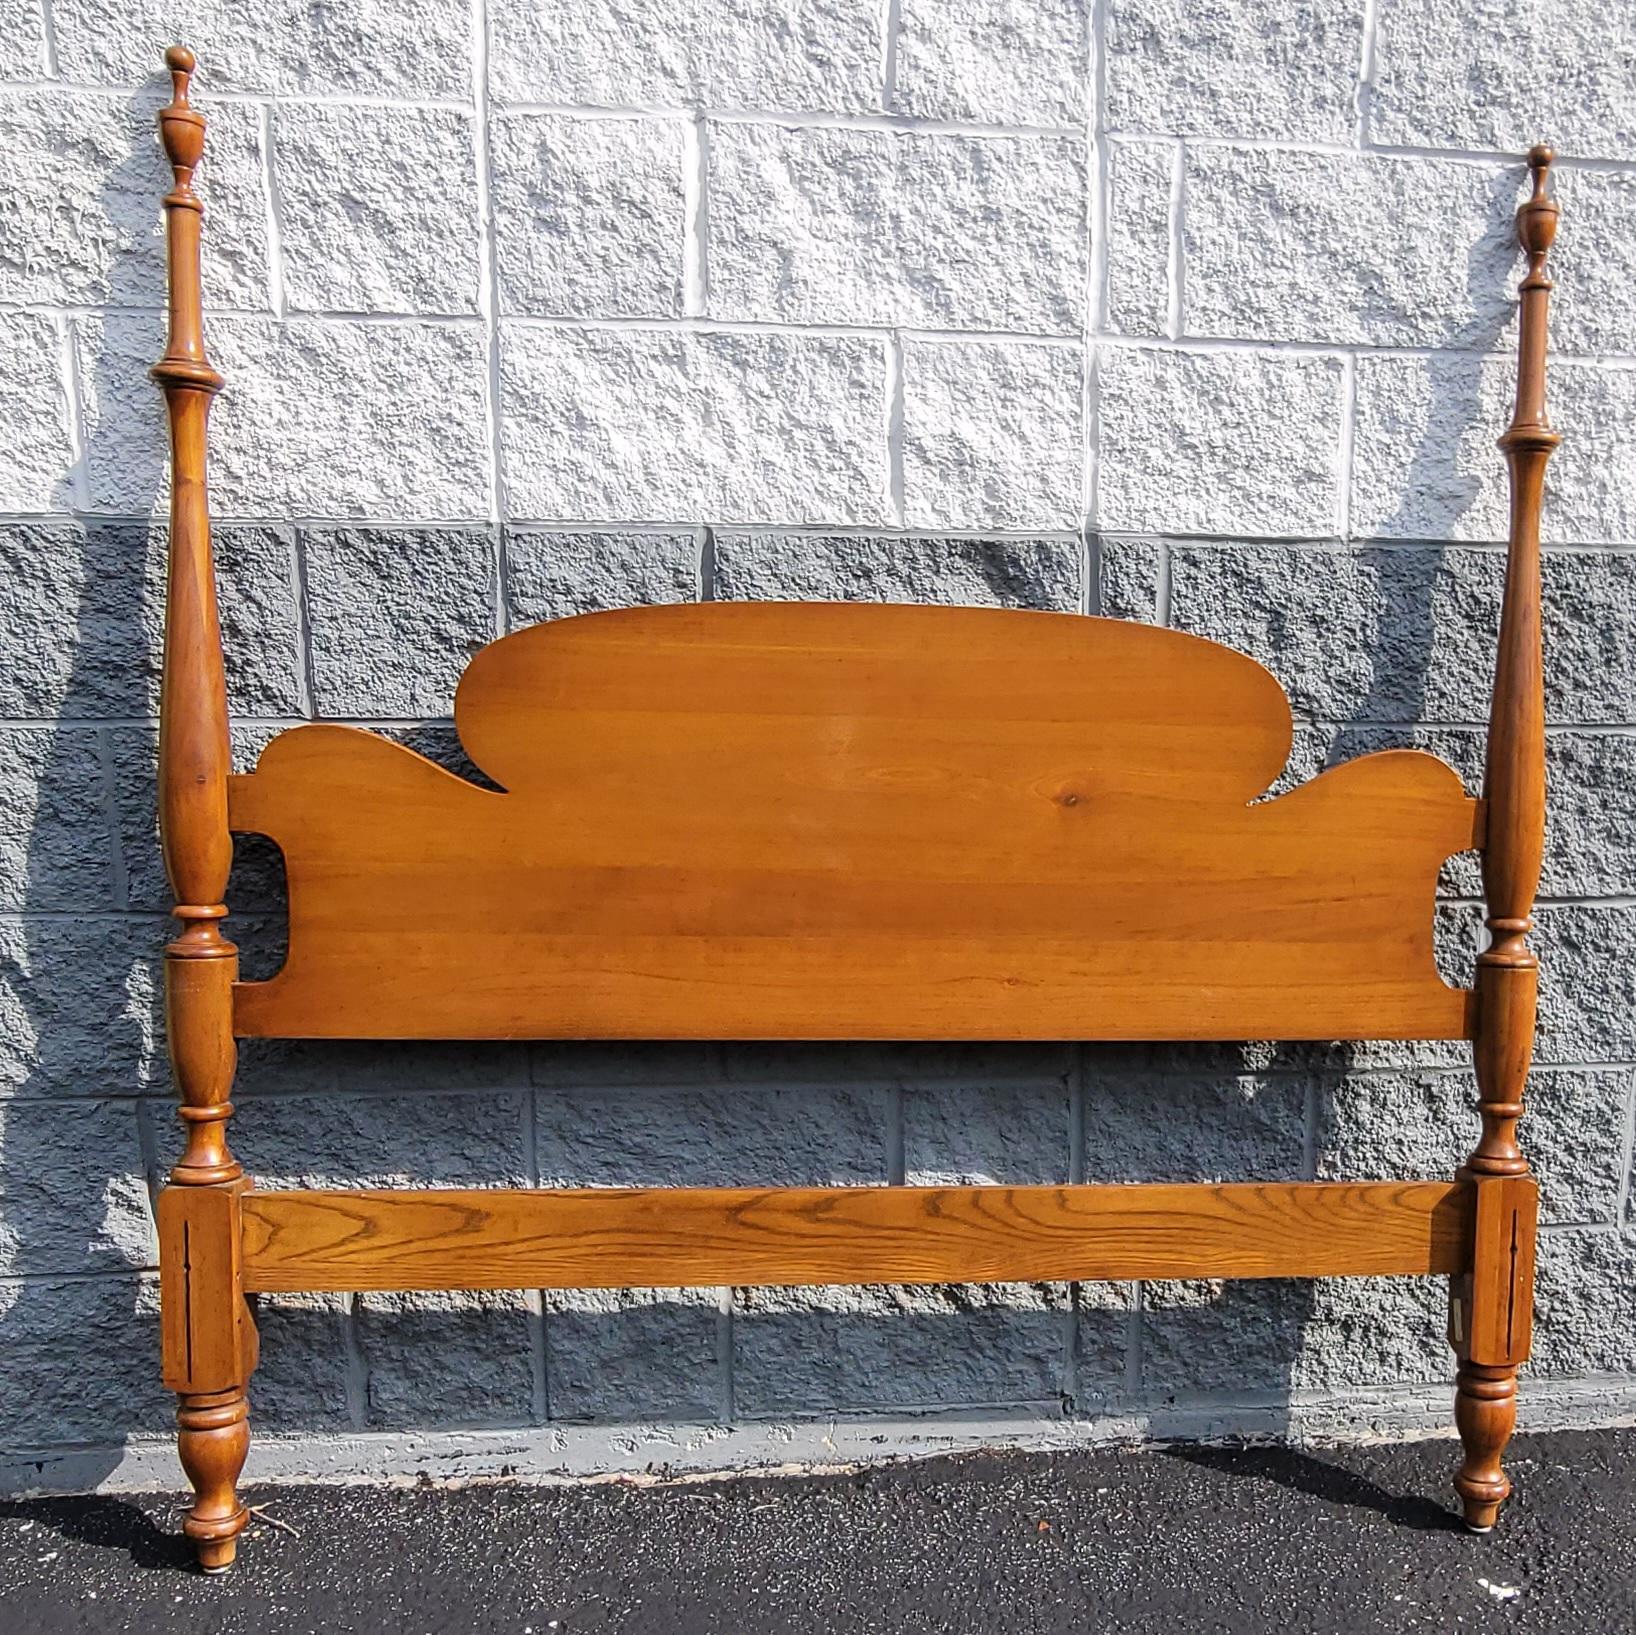 A mid-century burnished cherry poster full size headboard with urn finials from Davis Cabinet Furniture. This headboard will connect to any bed with a bedframe adapter from any hardware store
Good vintage condition. Measures 57